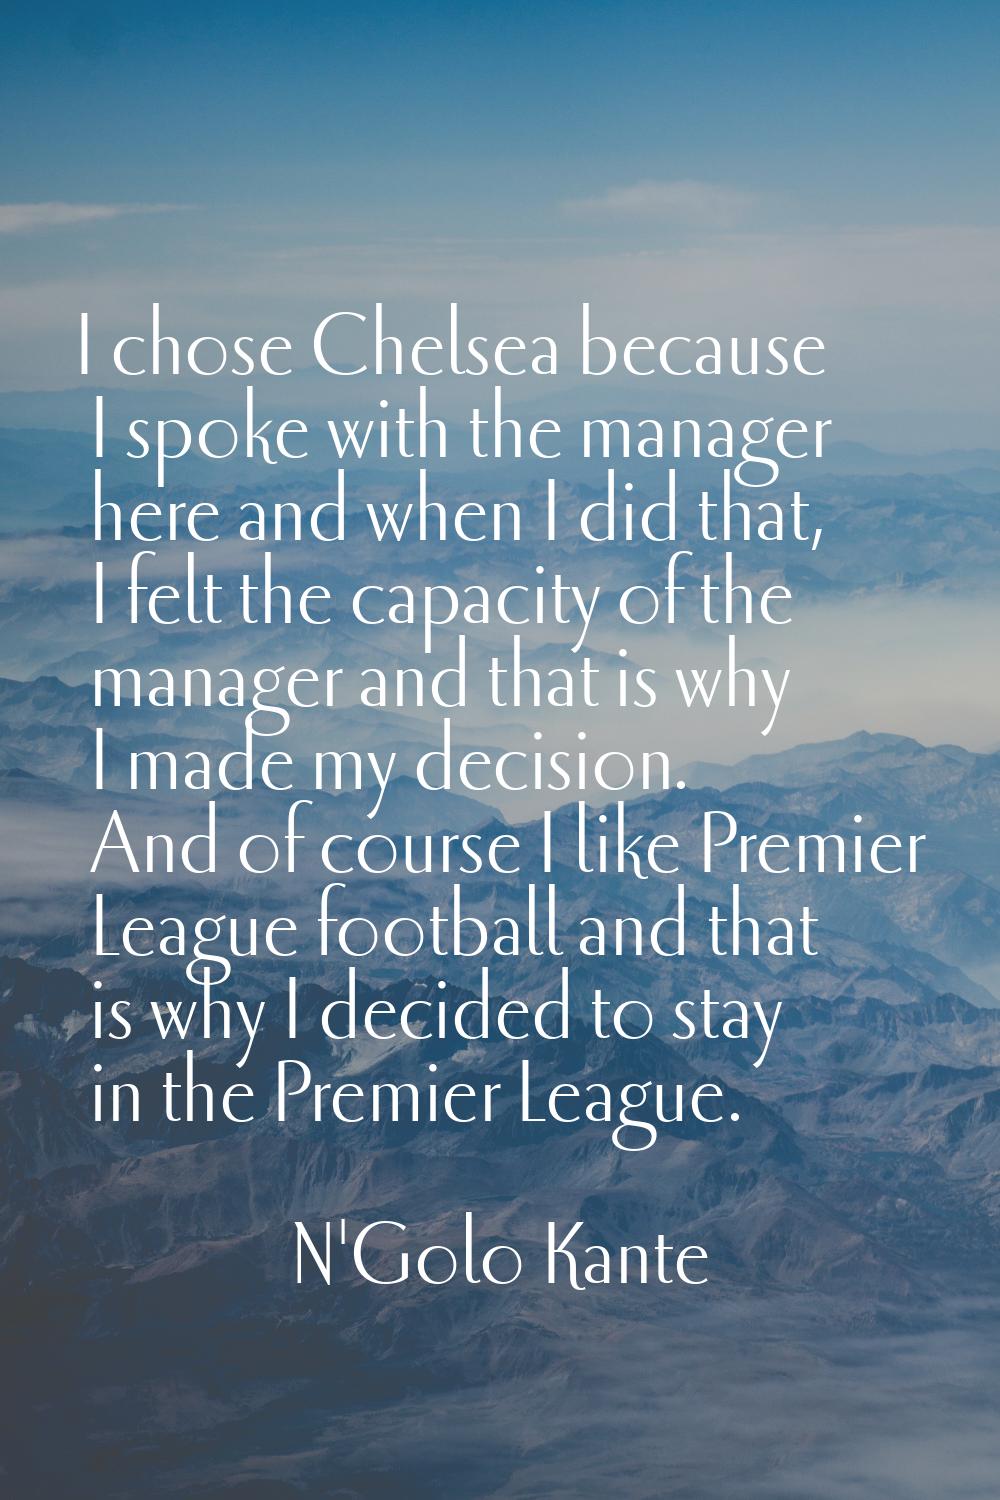 I chose Chelsea because I spoke with the manager here and when I did that, I felt the capacity of t